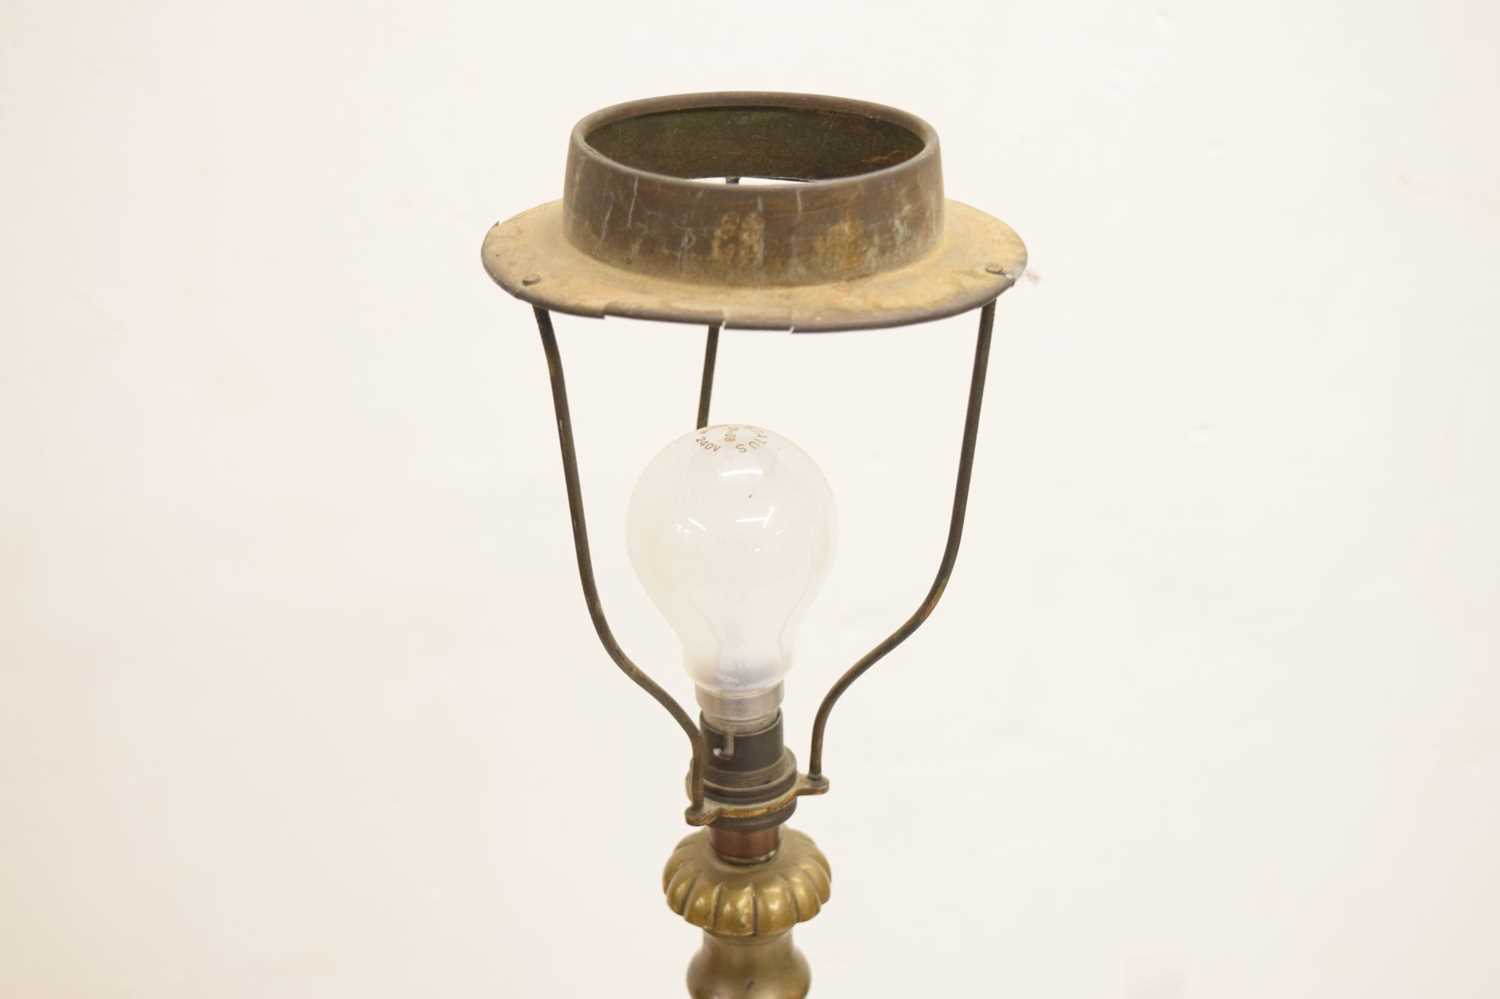 Early 20th century brass standard lamp - Image 5 of 5